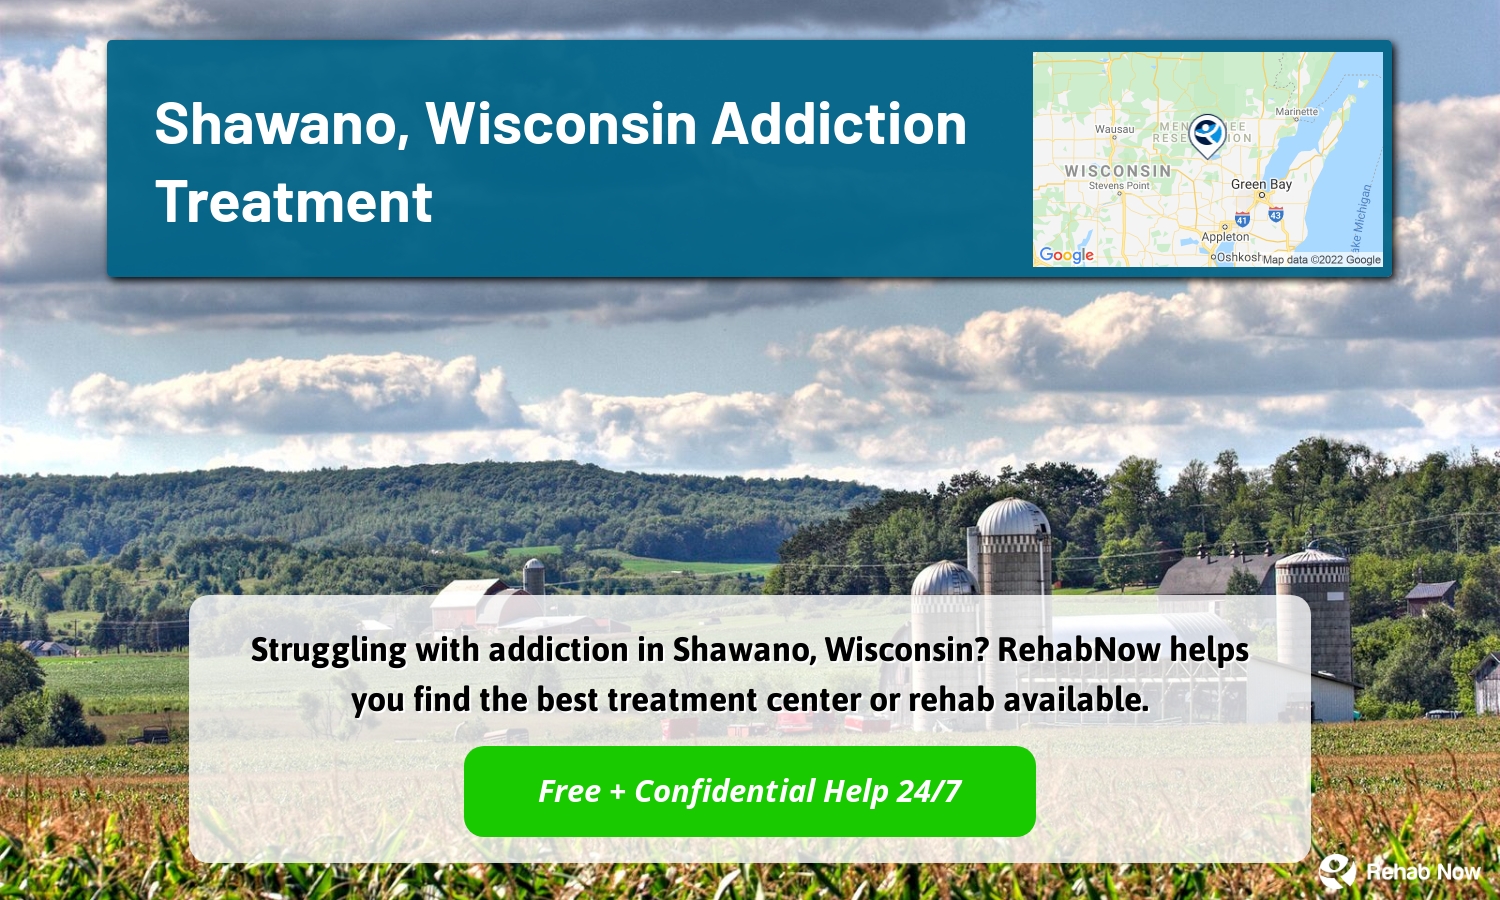 Struggling with addiction in Shawano, Wisconsin? RehabNow helps you find the best treatment center or rehab available.